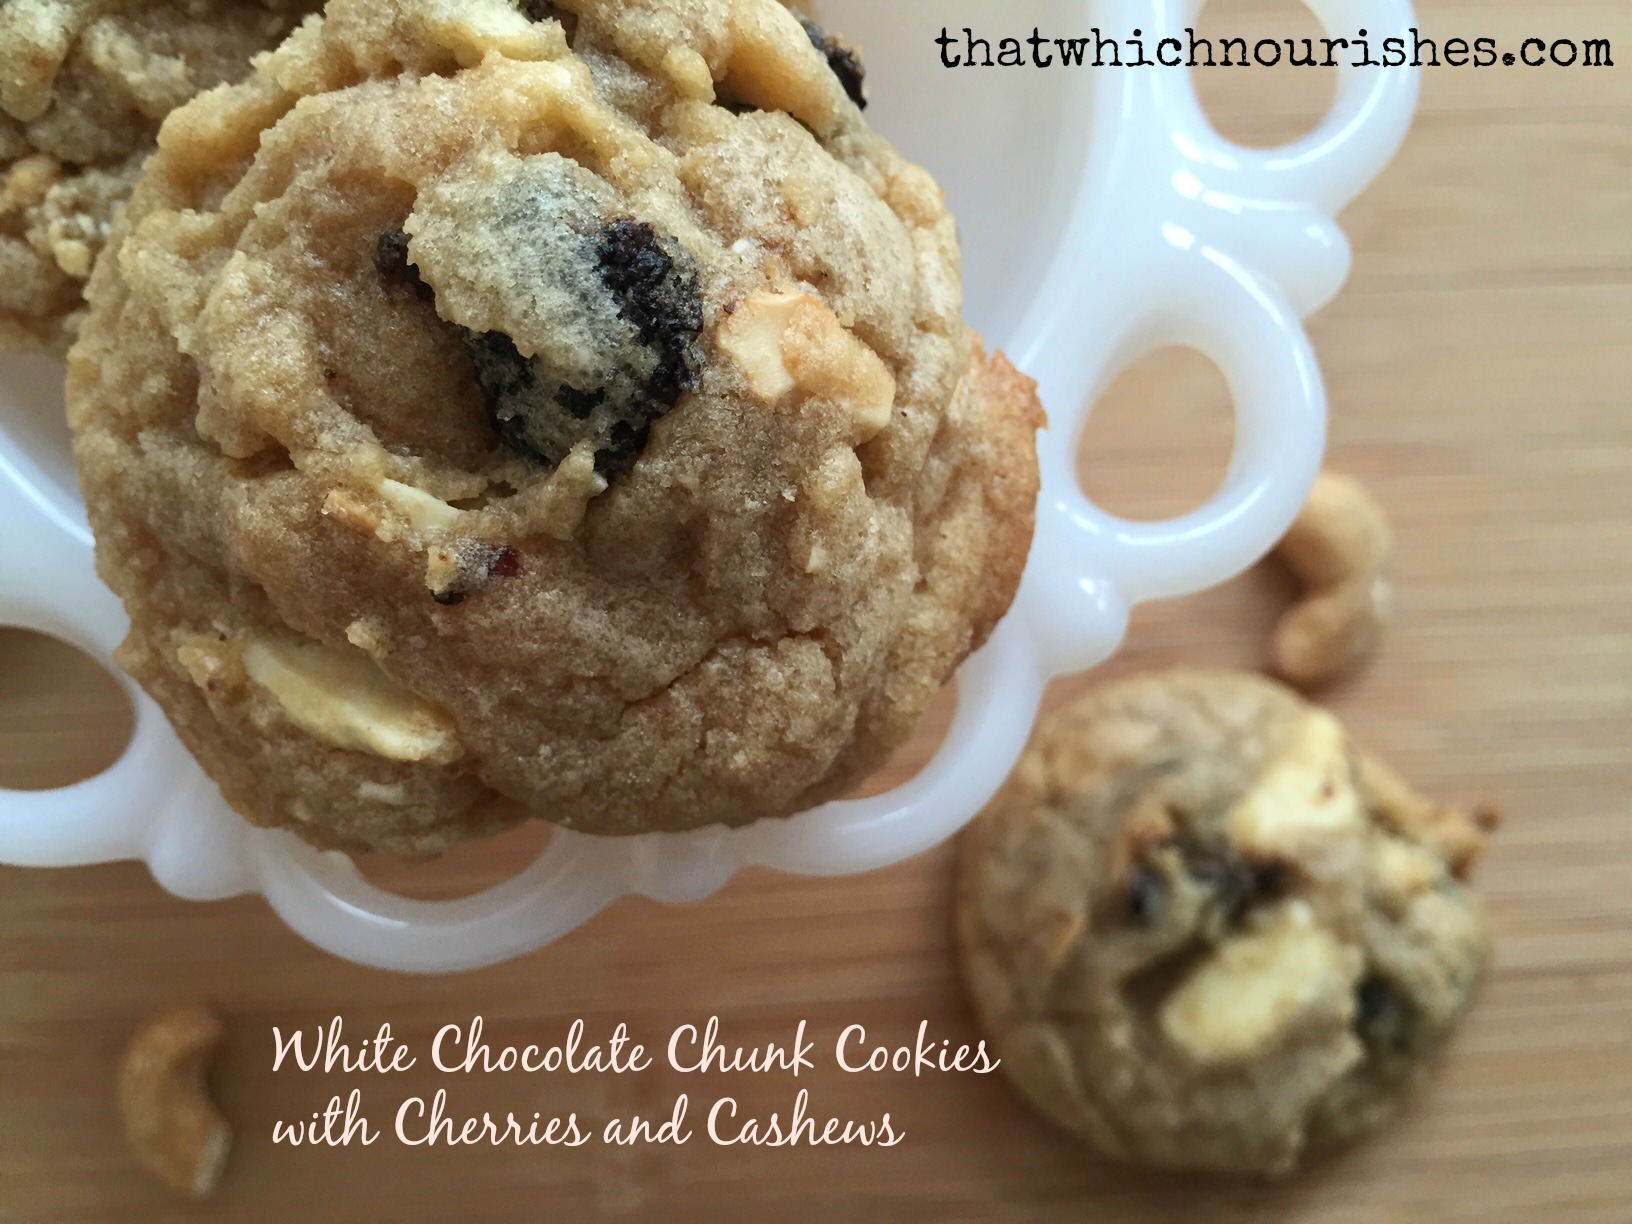 White Chocolate Chunk Cookies with Cherries and Cashews --chunks of melty white chocolate surrounded by tart cherries and creamy, crunchy cashews baked into a no-fail cookie dough -- |thatwhichnourishes.com